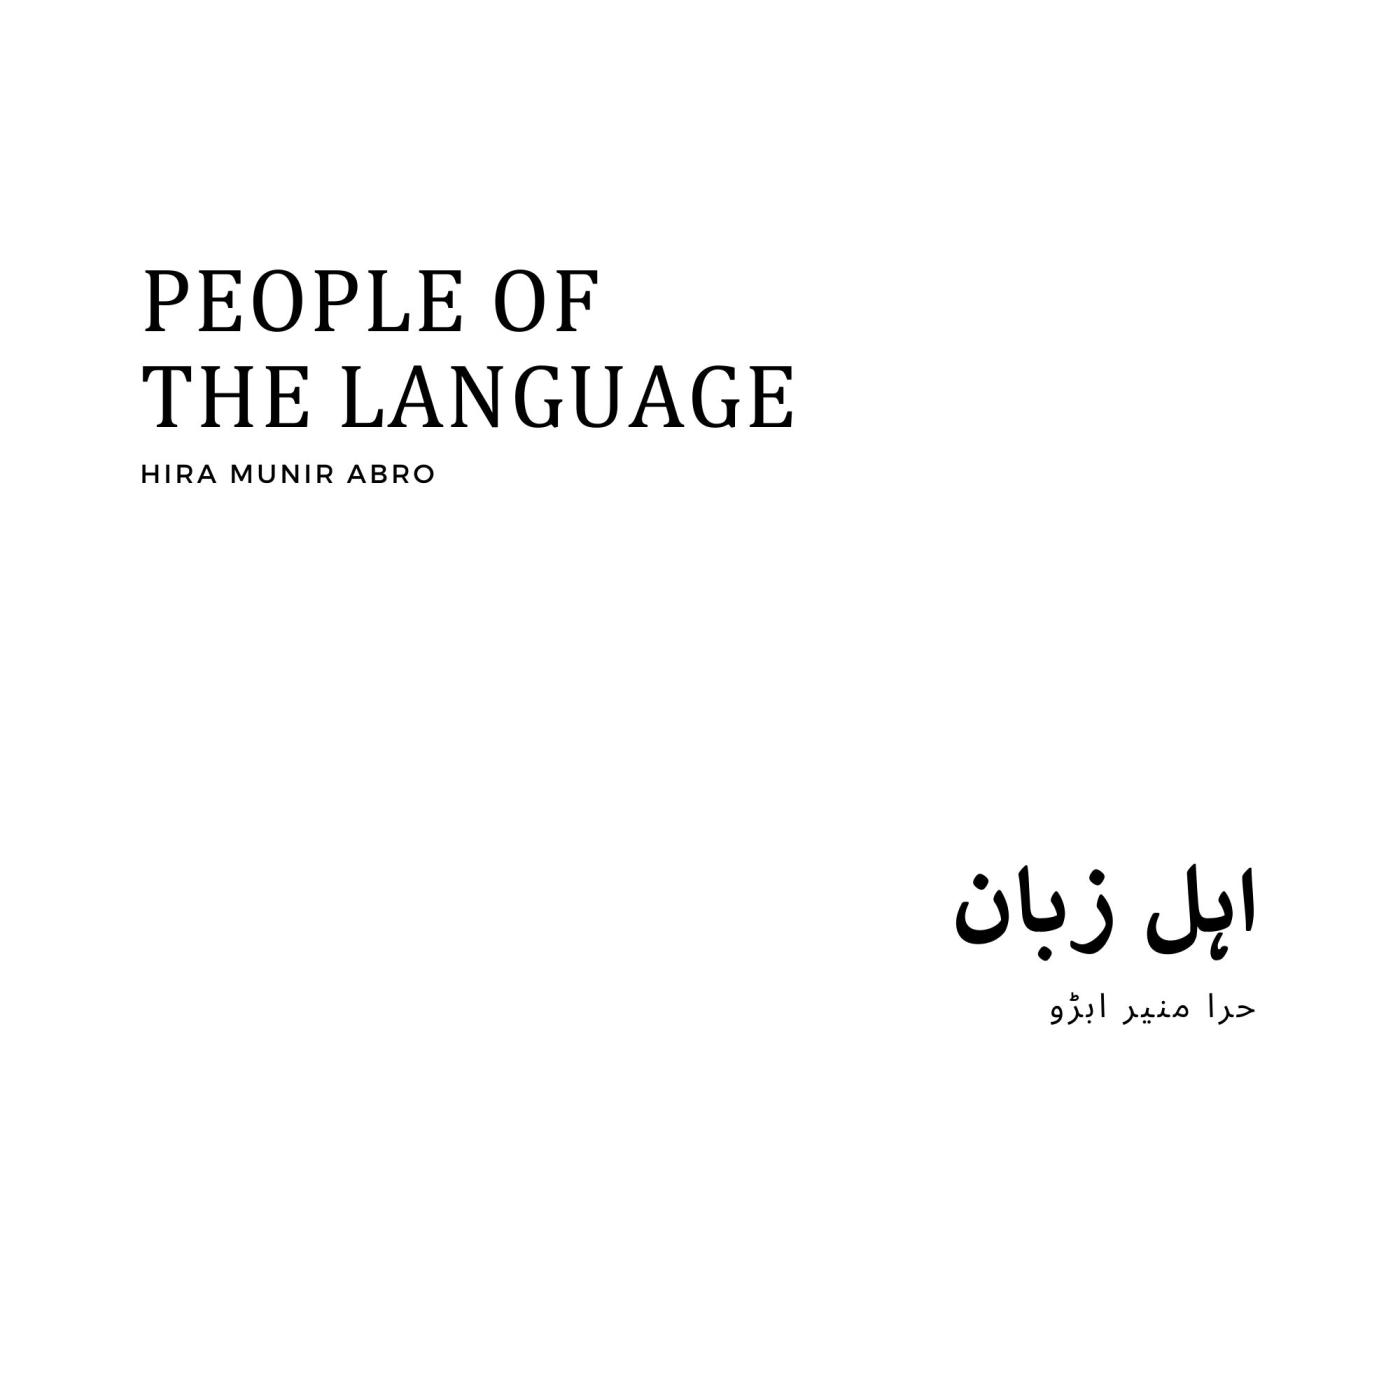 People of the Language